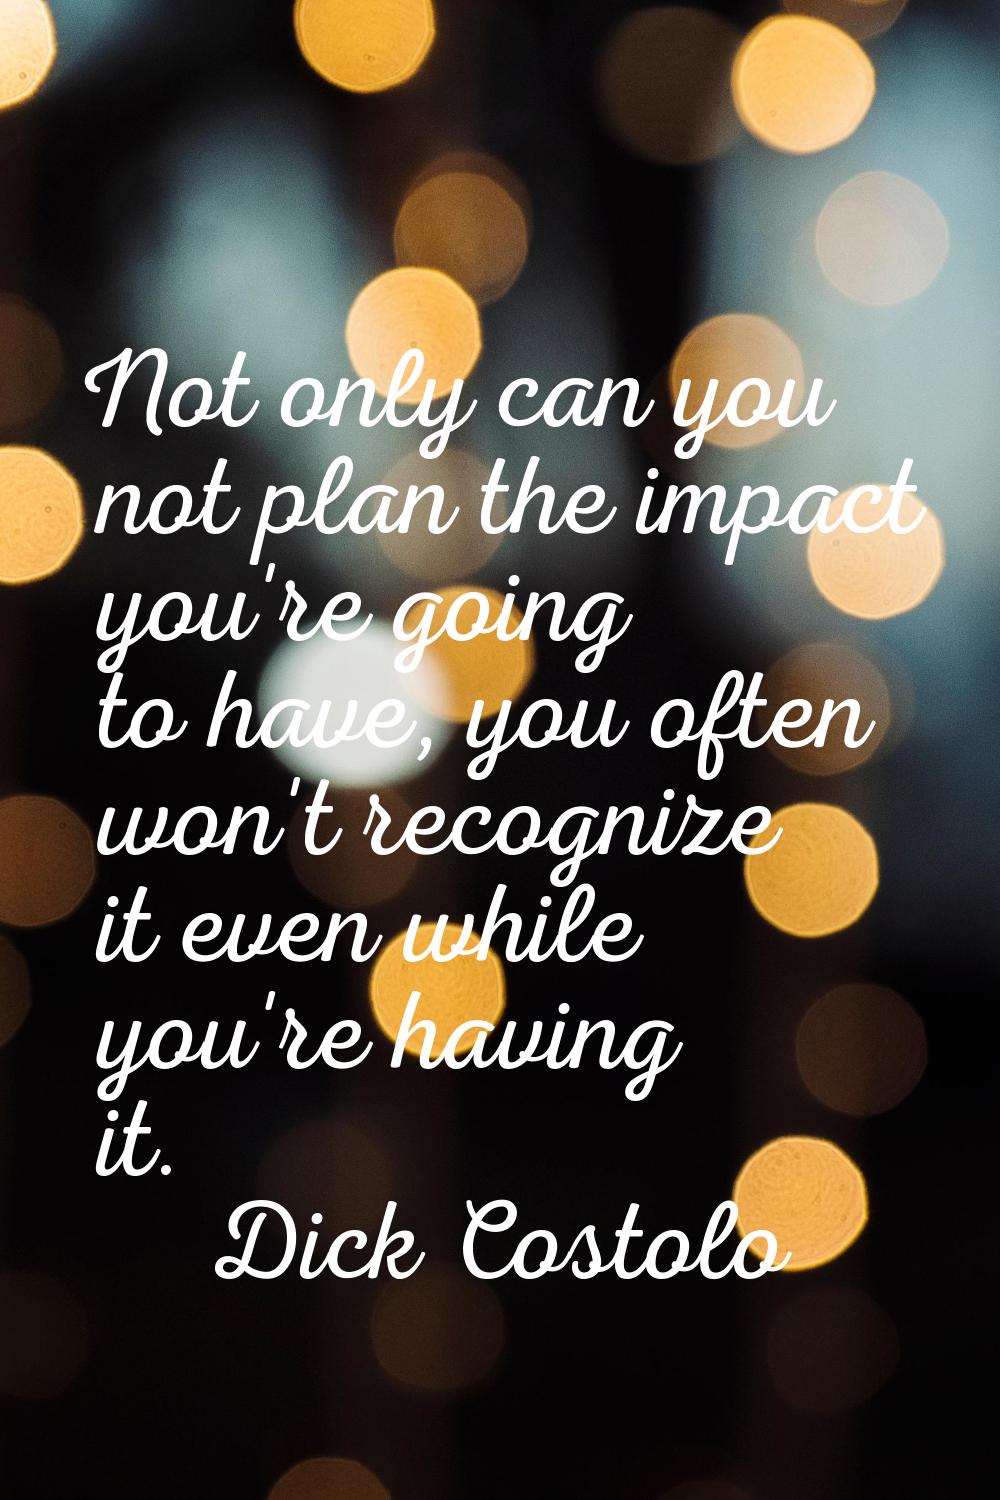 Not only can you not plan the impact you're going to have, you often won't recognize it even while 